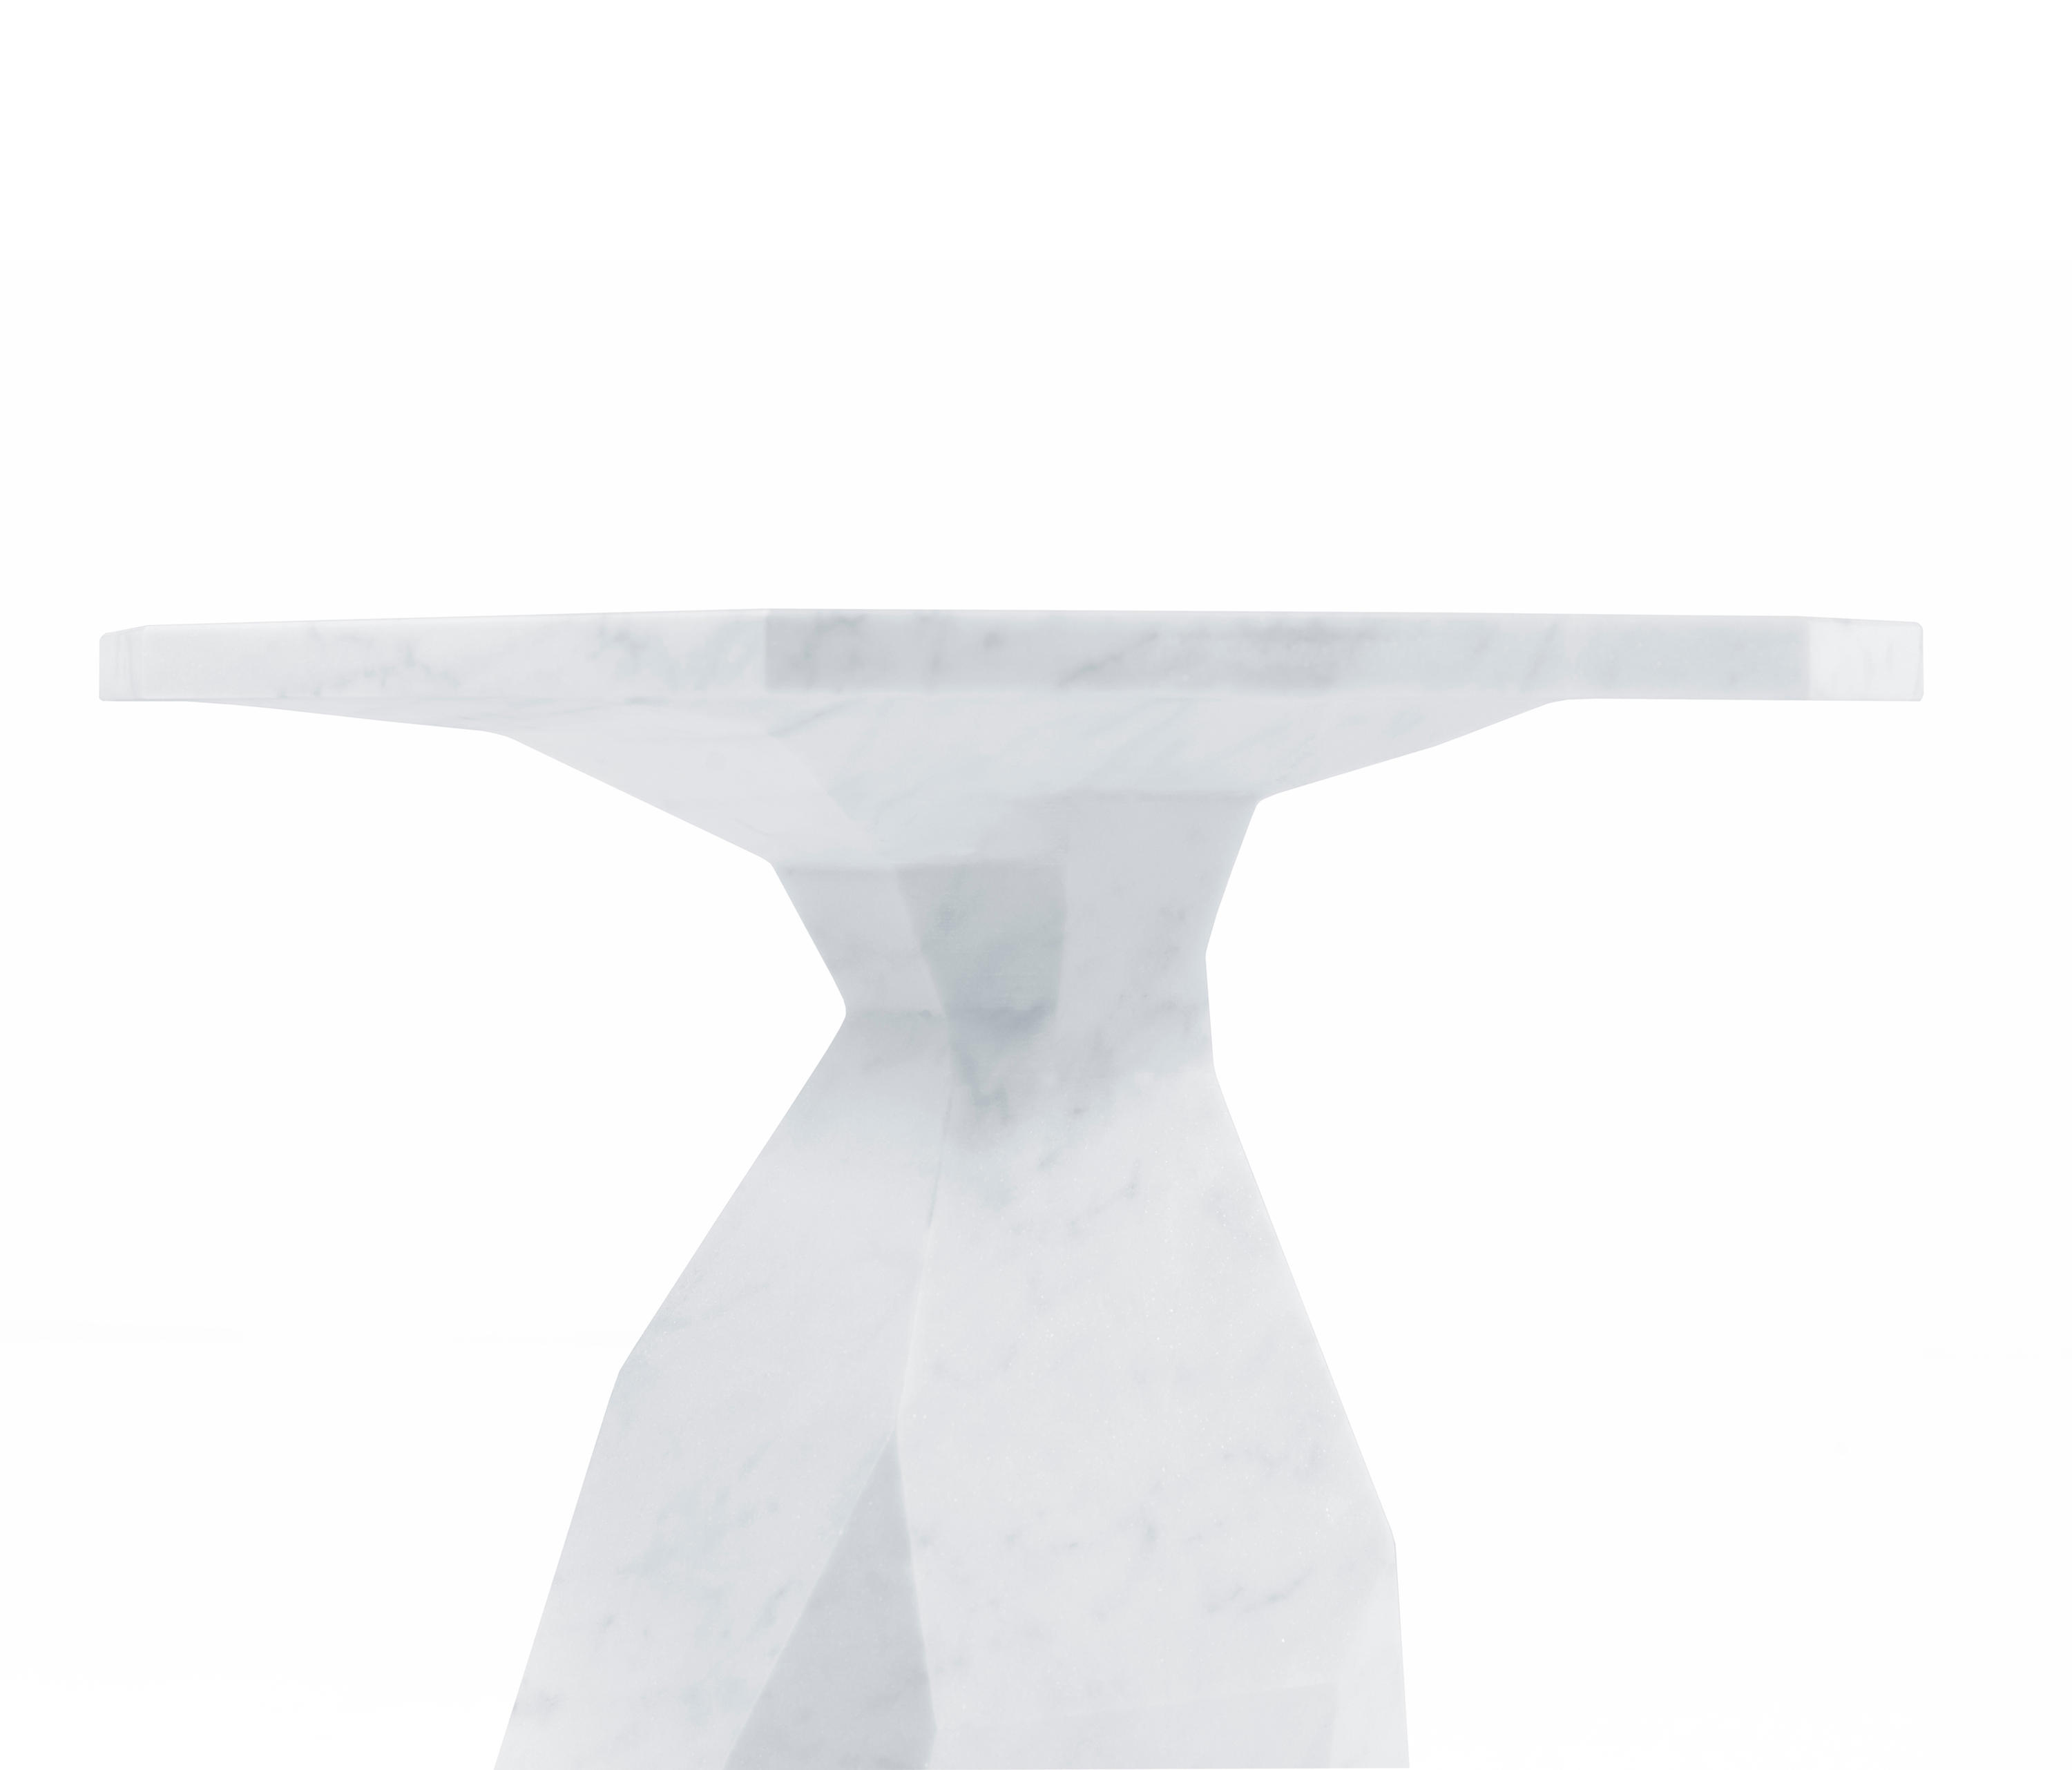 Rock Table by GINGER&JAGGER